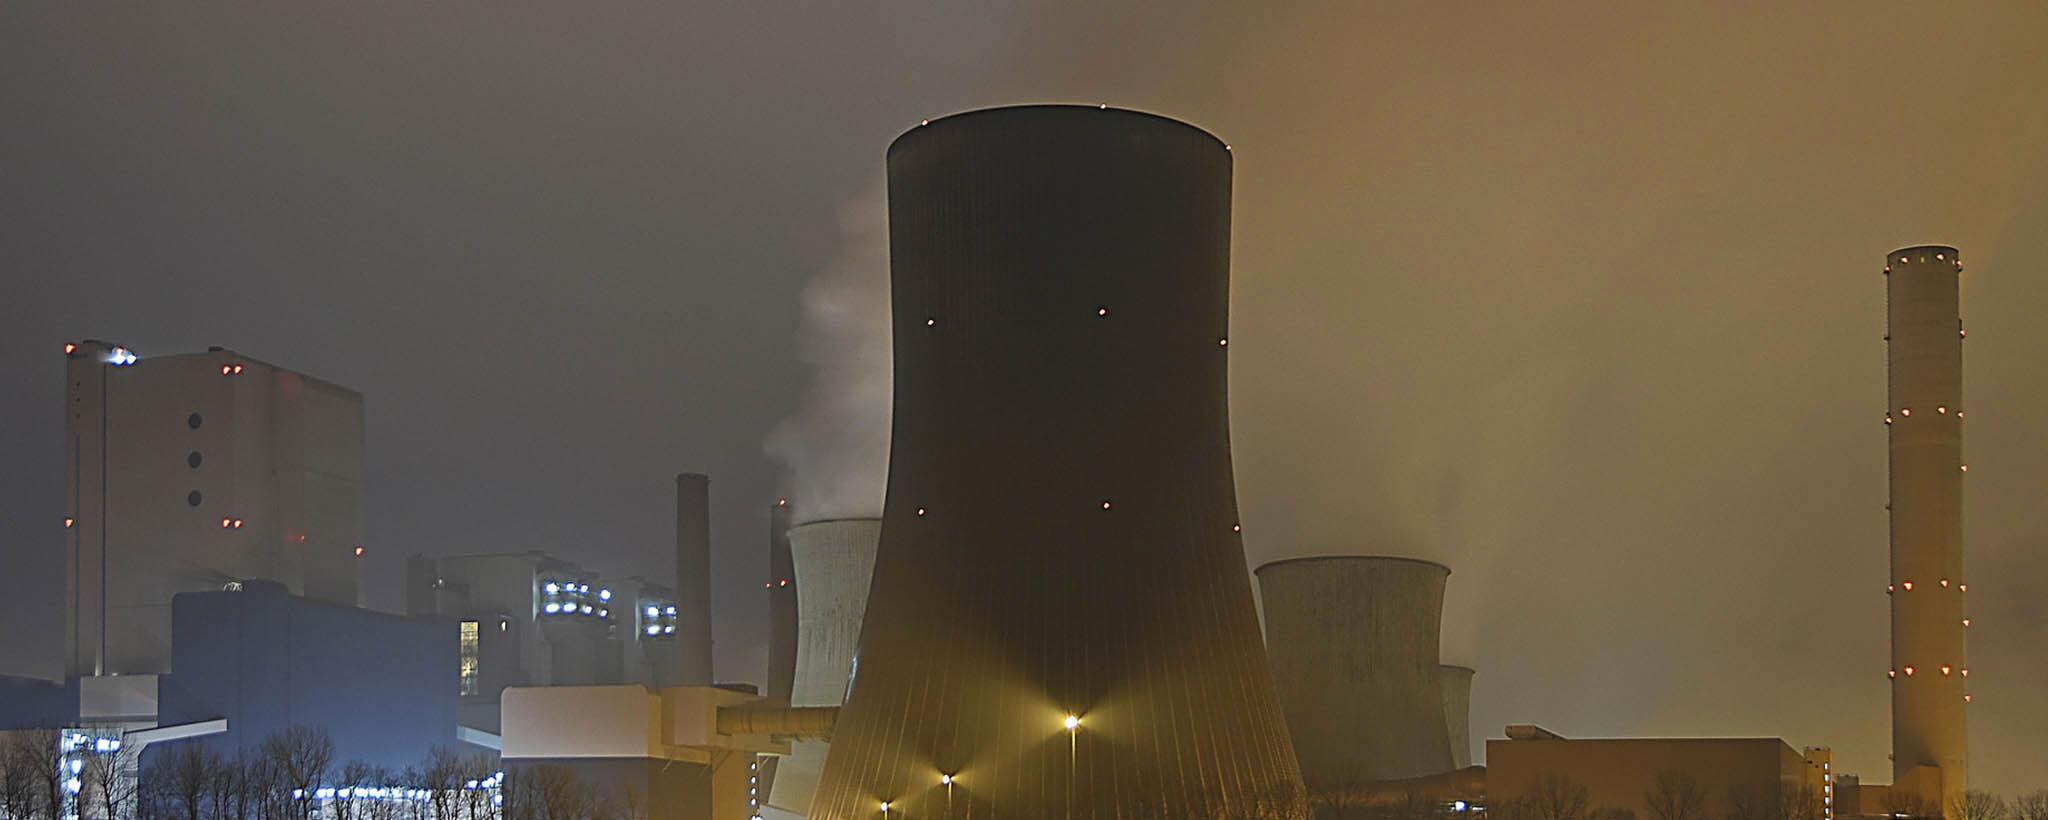 Power Plant Cooling Tower shown at dusk